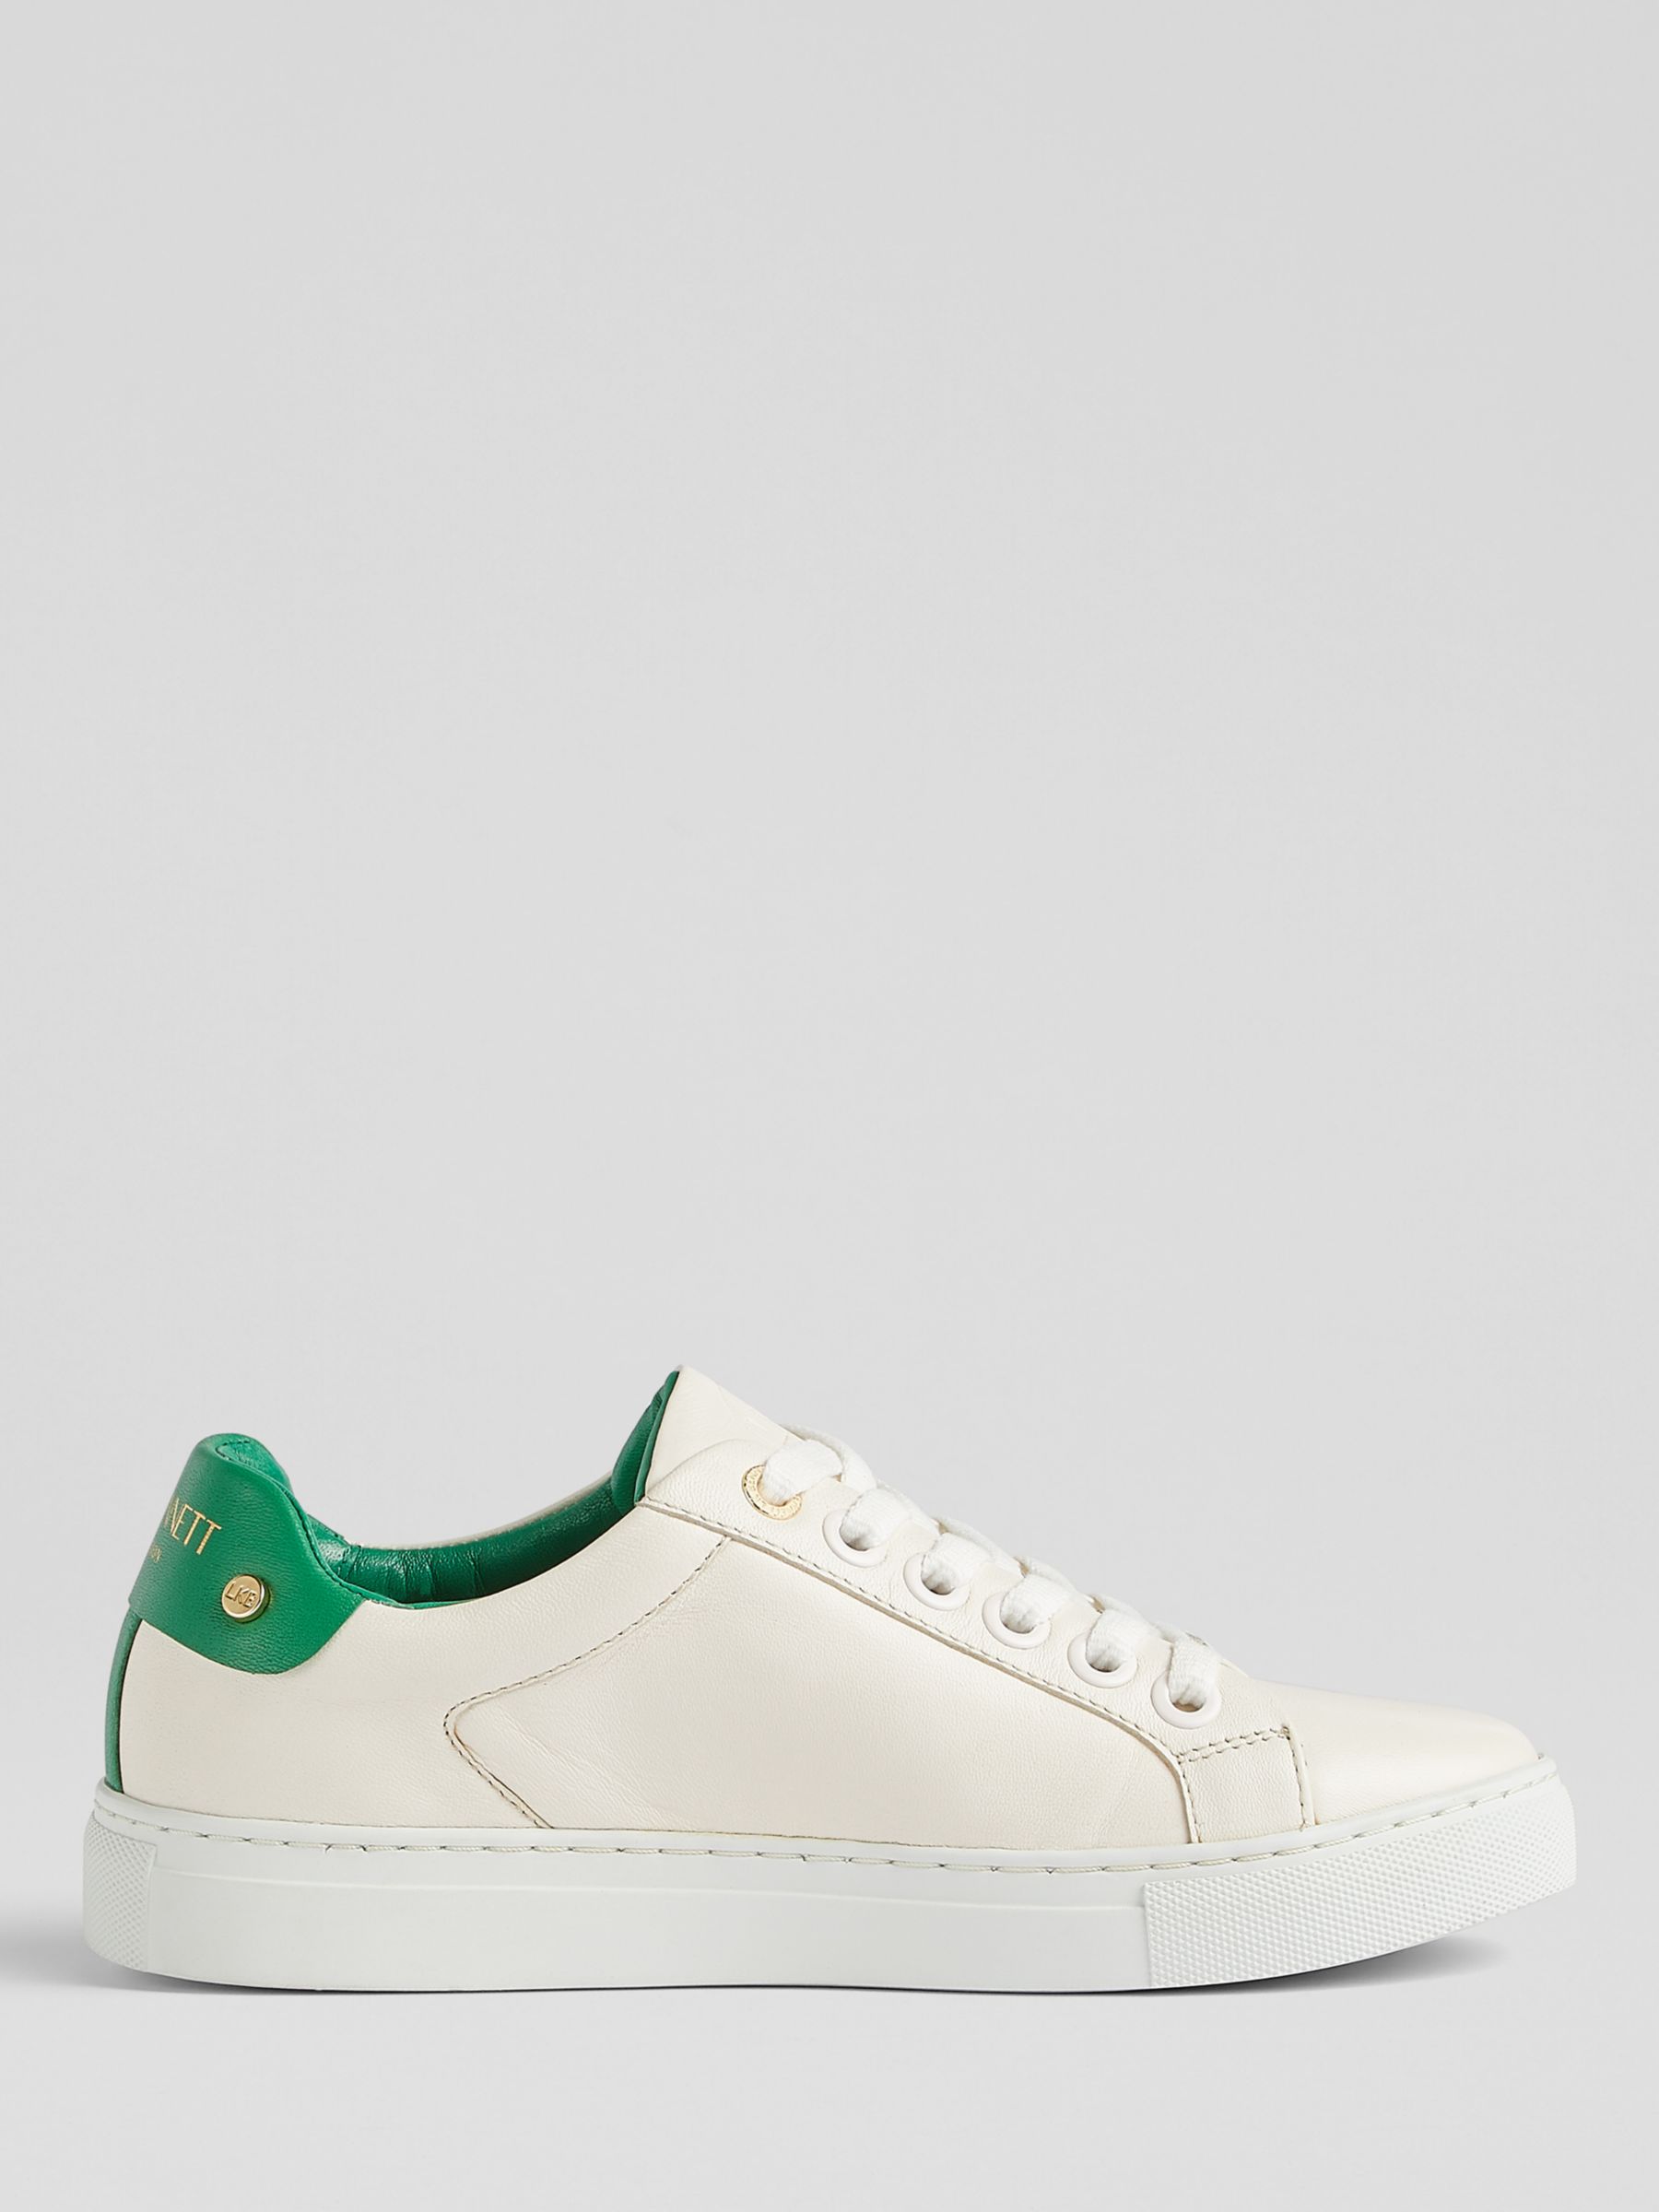 L.K.Bennett Signature Leather Trainers, White/Green at John Lewis ...